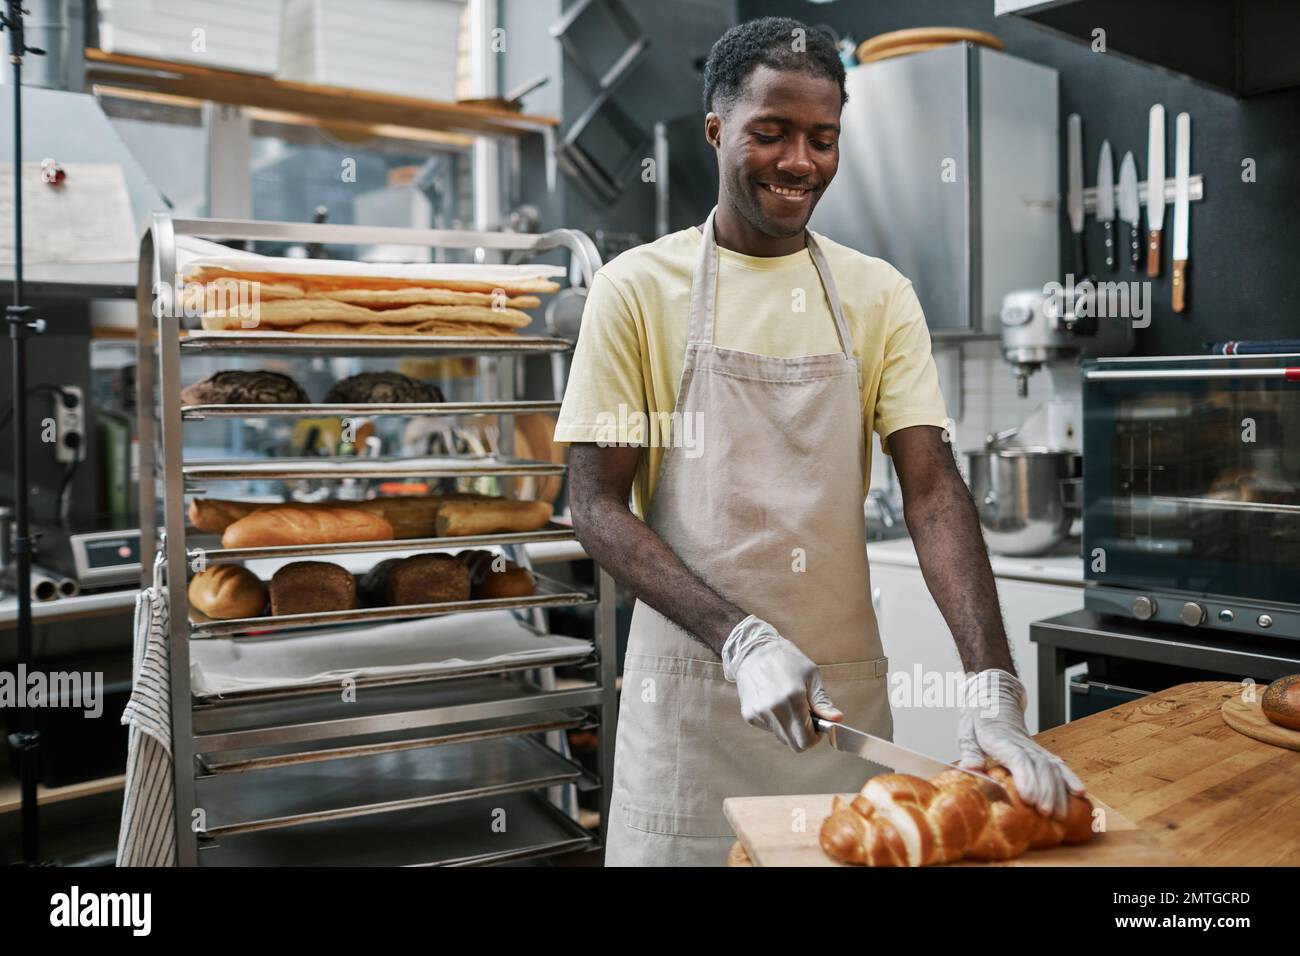 Happy Black baker cutting freshly baked bread in thin slices Stock Photo